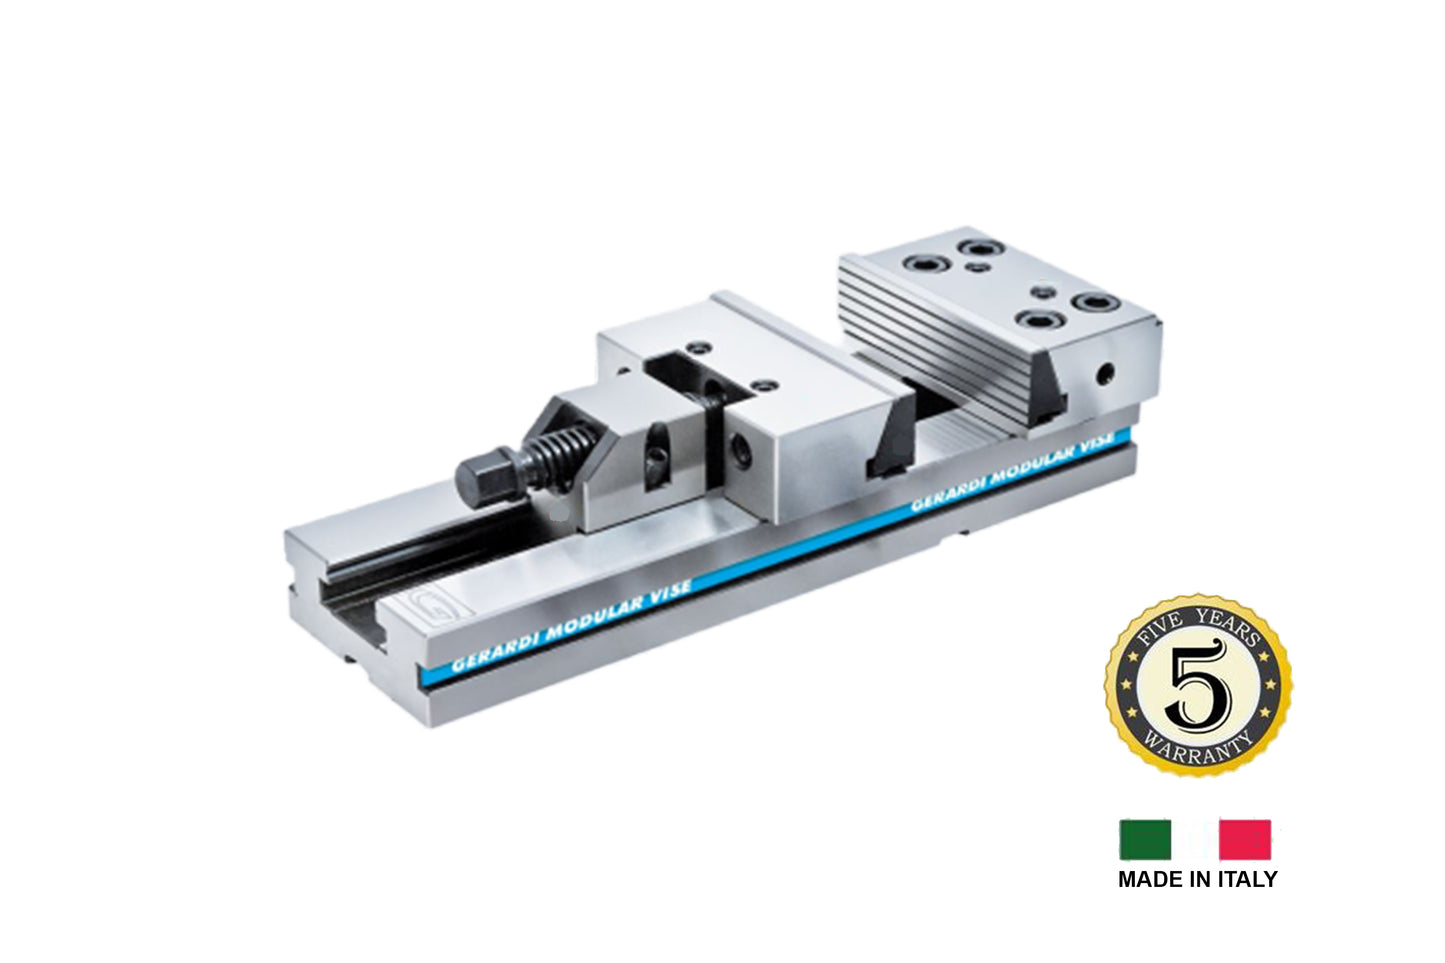 Gerardi Standard Precision Modular Vice with Solid Guided Movable Jaw (Width = 100mm, Opening = 100mm)